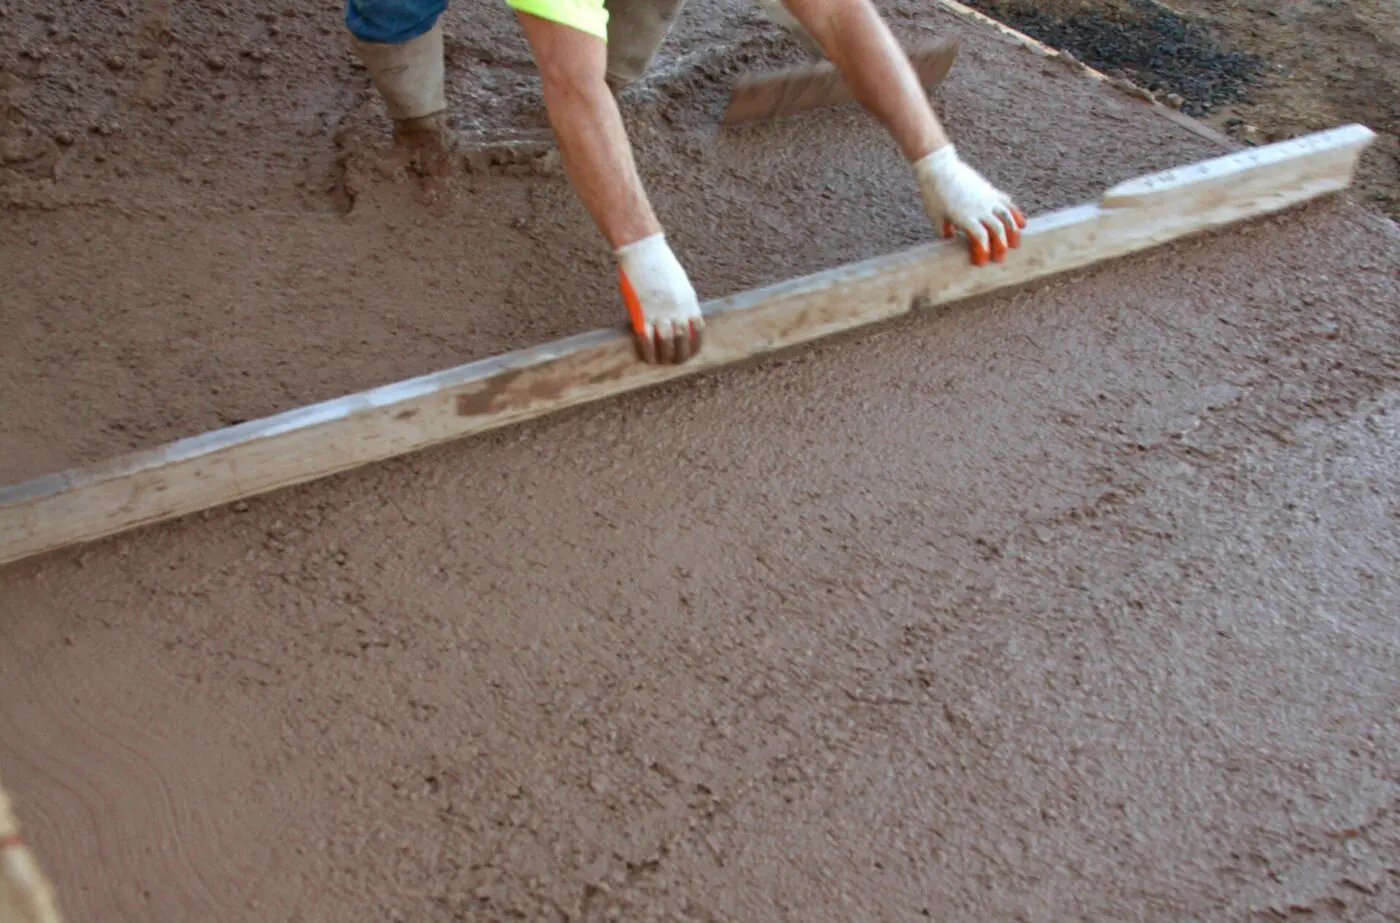 A person wearing a neon green shirt and white gloves spreads wet concrete with a long wooden board at a construction site in Pompano Beach, FL. Their lower half is visible, with legs in boots standing in the concrete. The freshly poured surface is being smoothed, ensuring cost-effective concrete solutions.